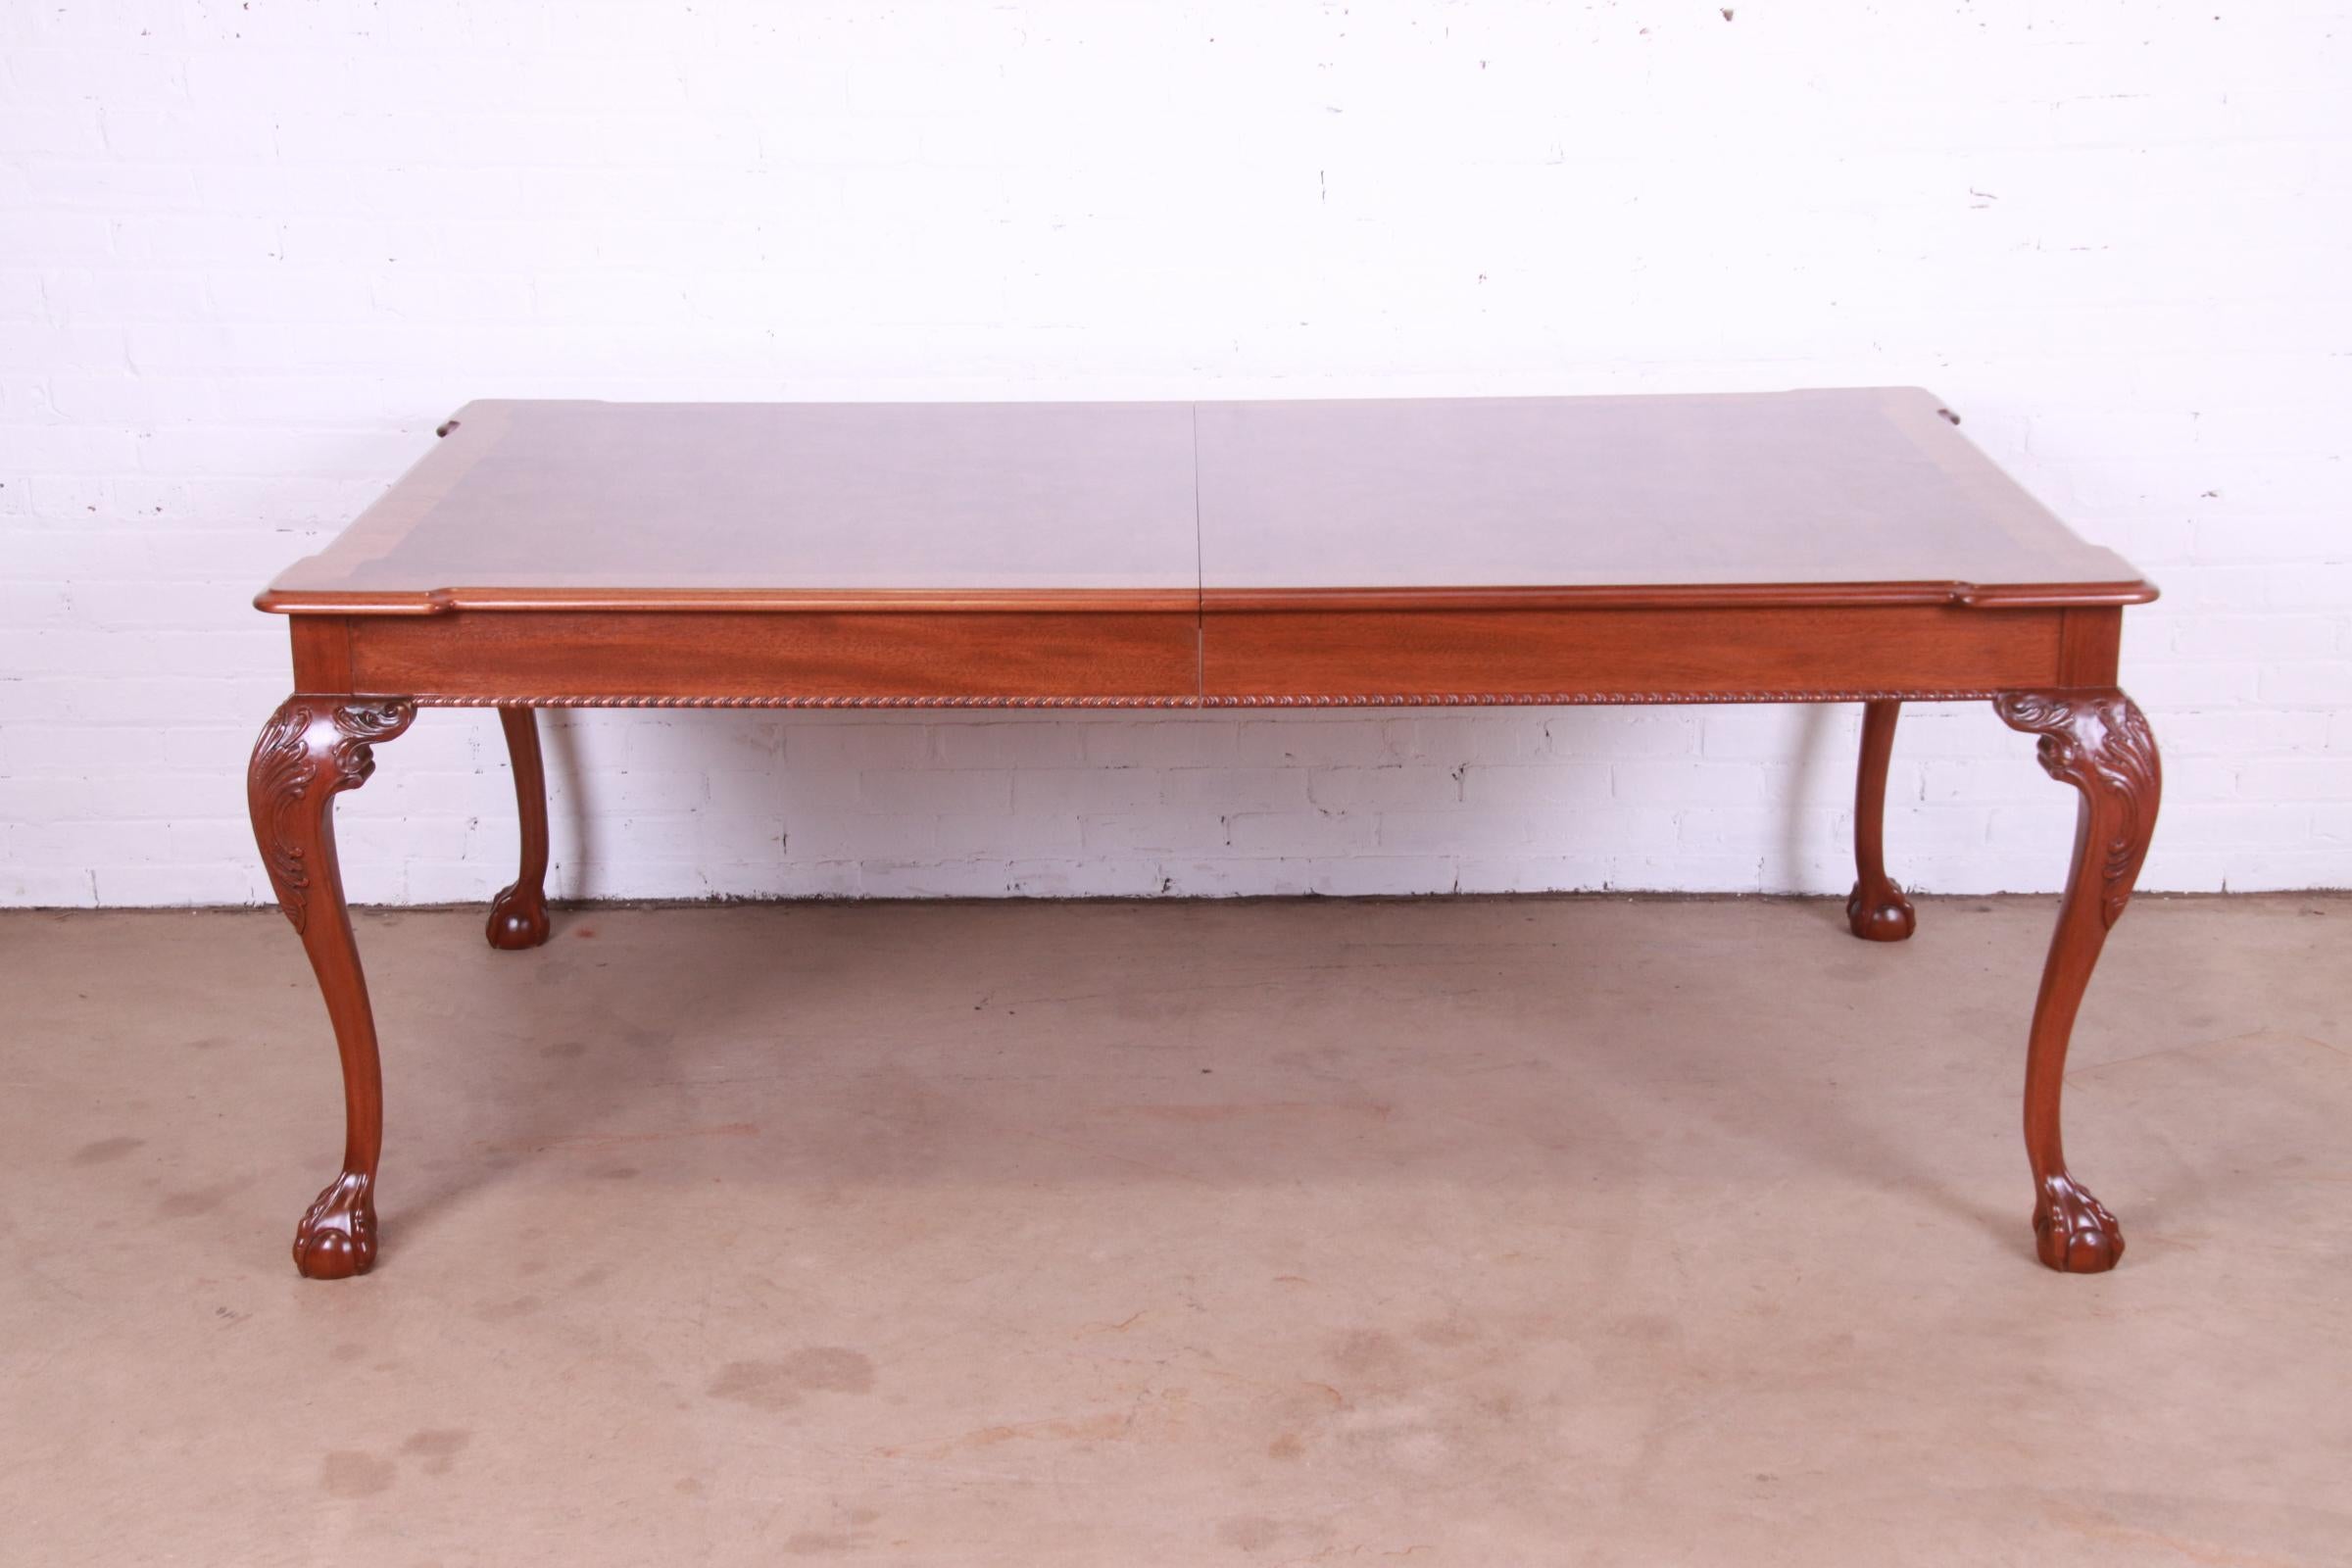 An exceptional Chippendale or Georgian style extension dining table

By Henredon, 